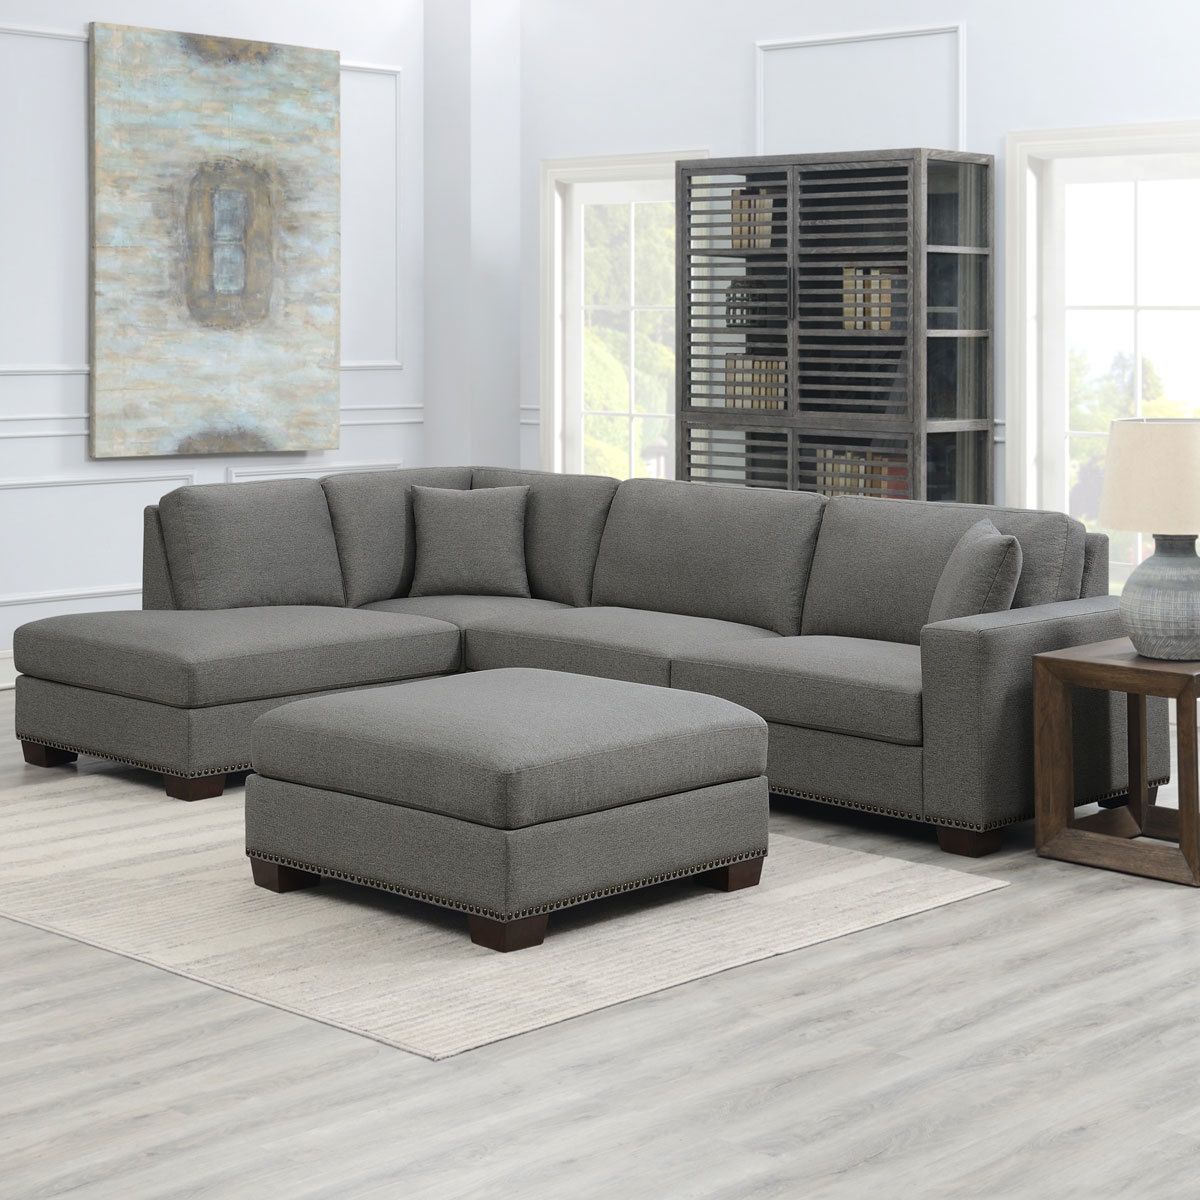 Thomasville Artesia Grey Fabric Sectional Sofa With Ottoman, Right Within Sofas With Ottomans (View 10 of 20)